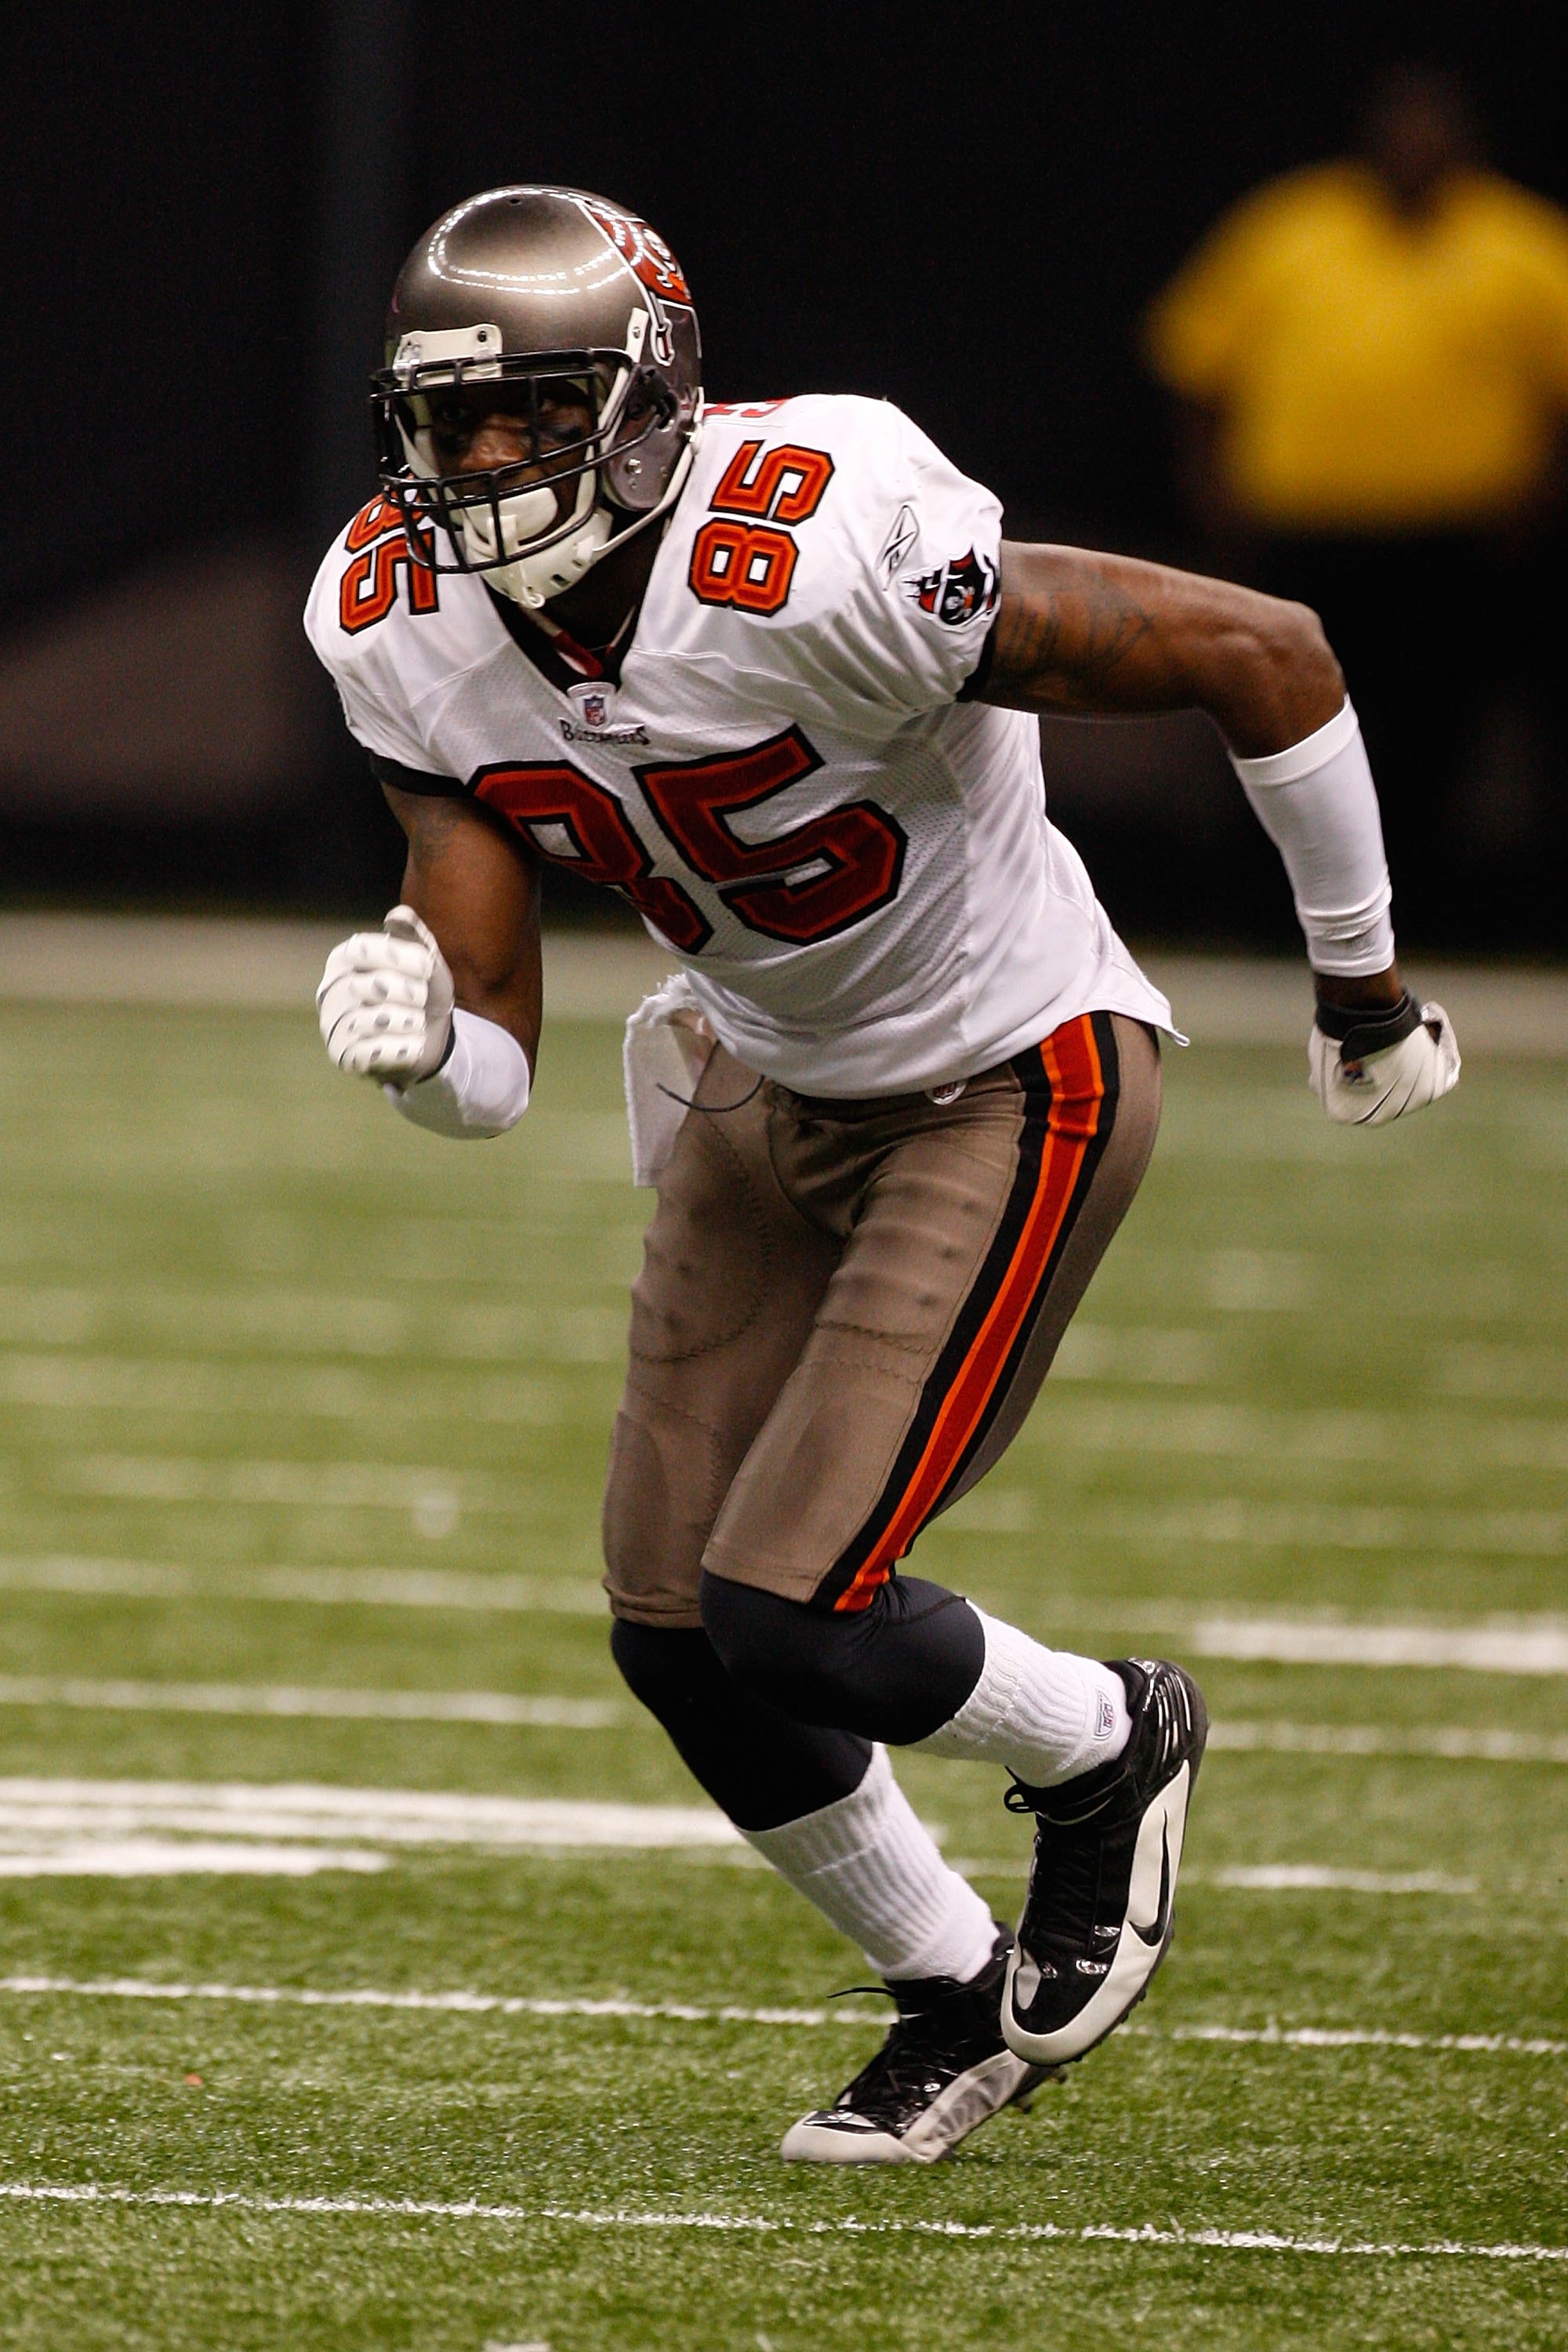 NEW ORLEANS - DECEMBER 27:  Maurice Stovall #85 of the Tampa Bay Buccaneers runs during the game against the New Orleans Saints at the Louisiana Superdome on December 27, 2009 in New Orleans, Louisiana.  (Photo by Chris Graythen/Getty Images)